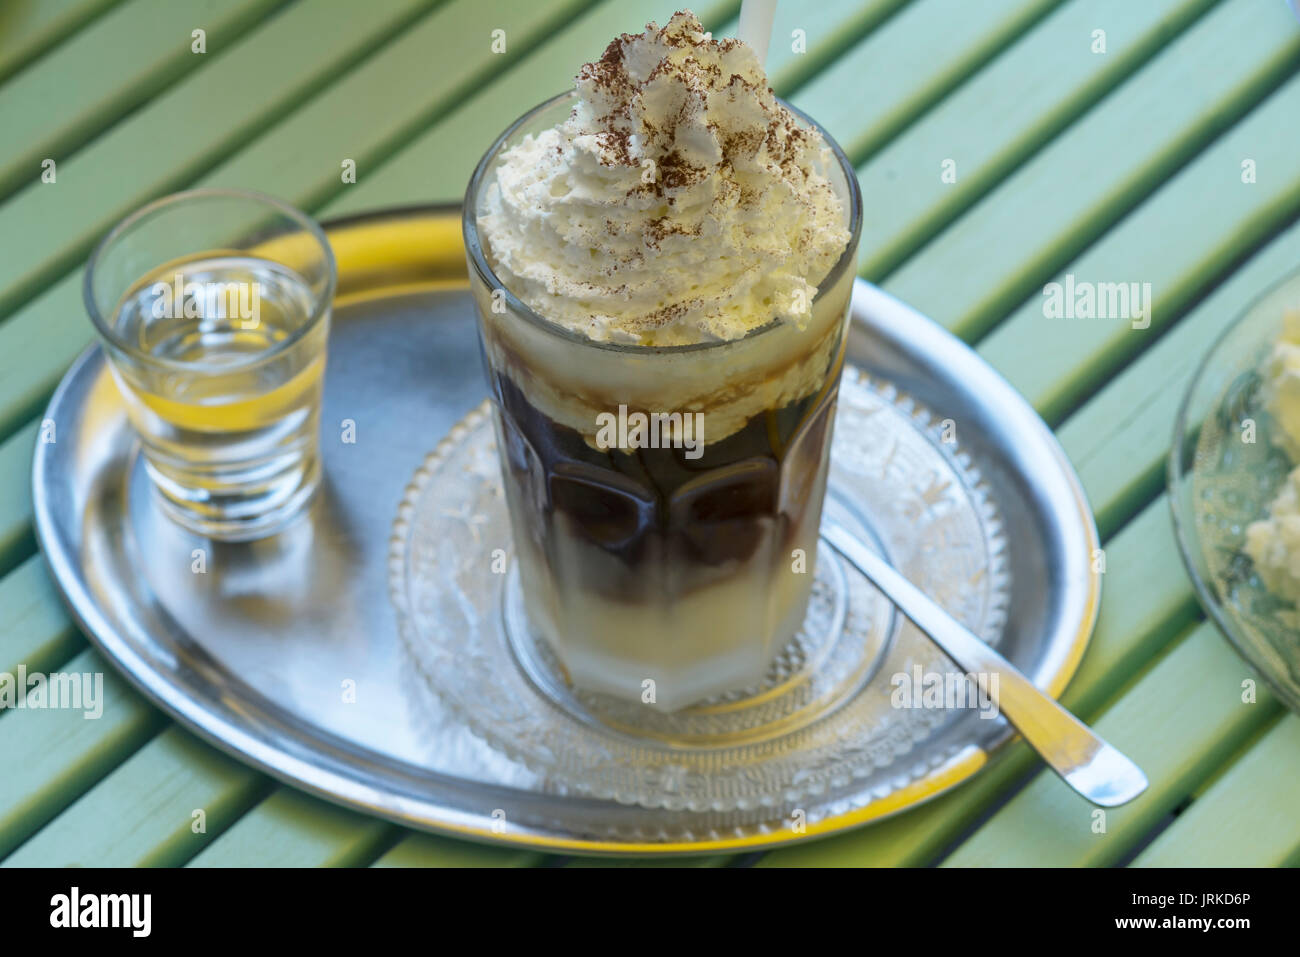 Iced coffee with cream on a silver tray Stock Photo